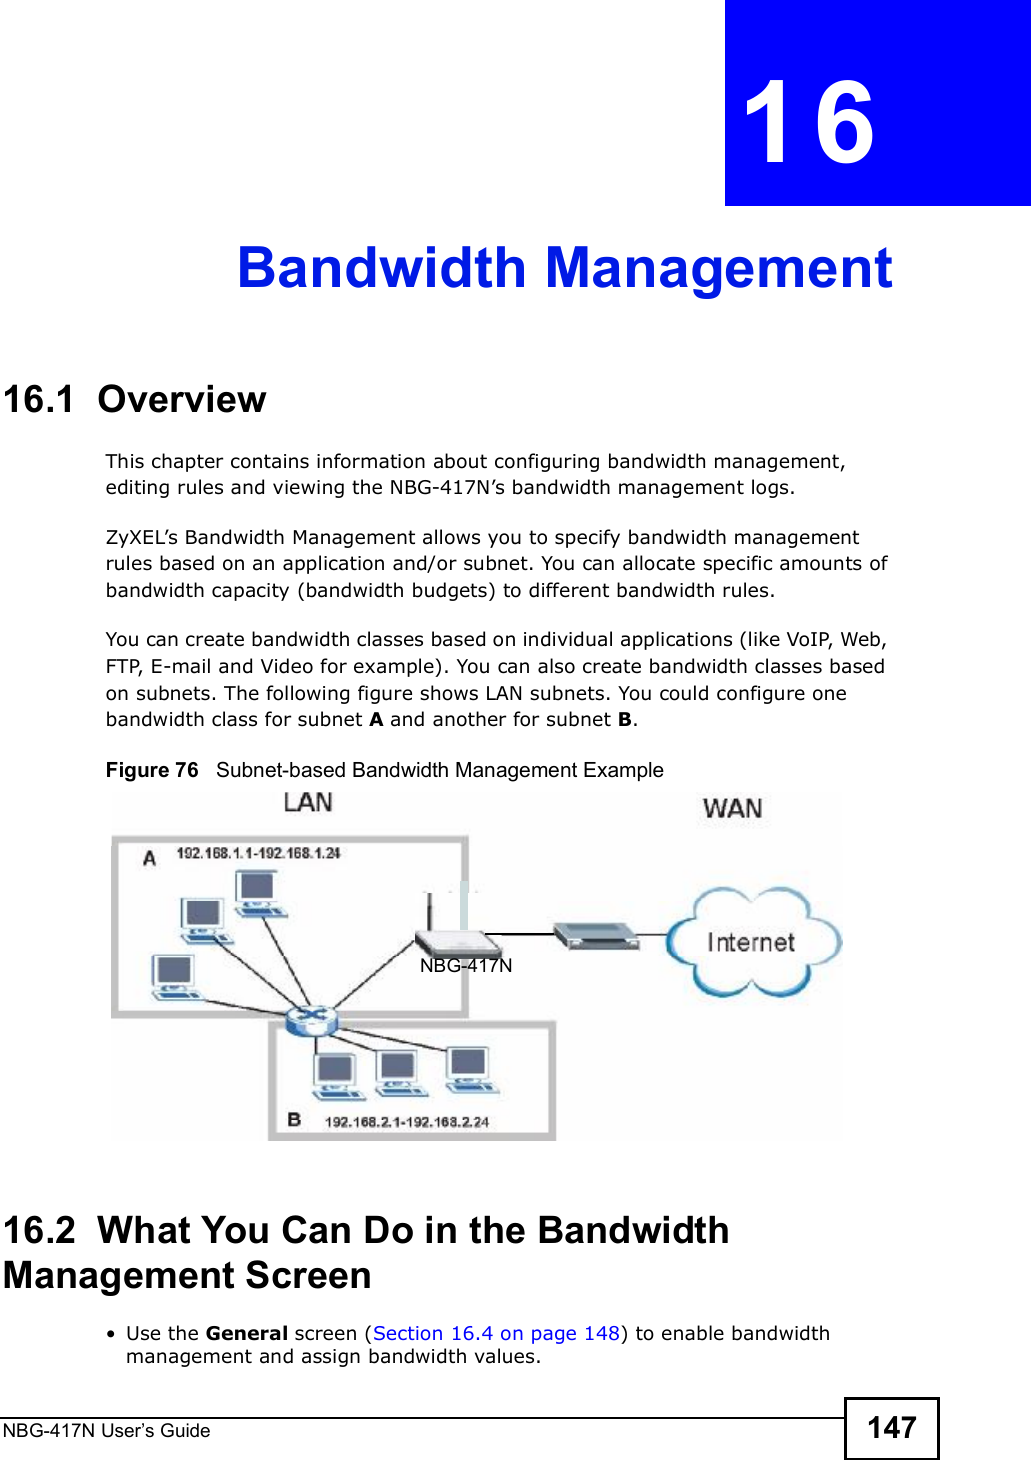 NBG-417N User s Guide 147CHAPTER  16 Bandwidth Management16.1  Overview This chapter contains information about configuring bandwidth management, editing rules and viewing the NBG-417N!s bandwidth management logs.ZyXEL!s Bandwidth Management allows you to specify bandwidth management rules based on an application and/or subnet. You can allocate specific amounts of bandwidth capacity (bandwidth budgets) to different bandwidth rules. You can create bandwidth classes based on individual applications (like VoIP, Web, FTP, E-mail and Video for example). You can also create bandwidth classes based on subnets. The following figure shows LAN subnets. You could configure one bandwidth class for subnet A and another for subnet B. Figure 76   Subnet-based Bandwidth Management Example16.2  What You Can Do in the Bandwidth Management Screen Use the General screen (Section 16.4 on page 148) to enable bandwidth management and assign bandwidth values.NBG-417N